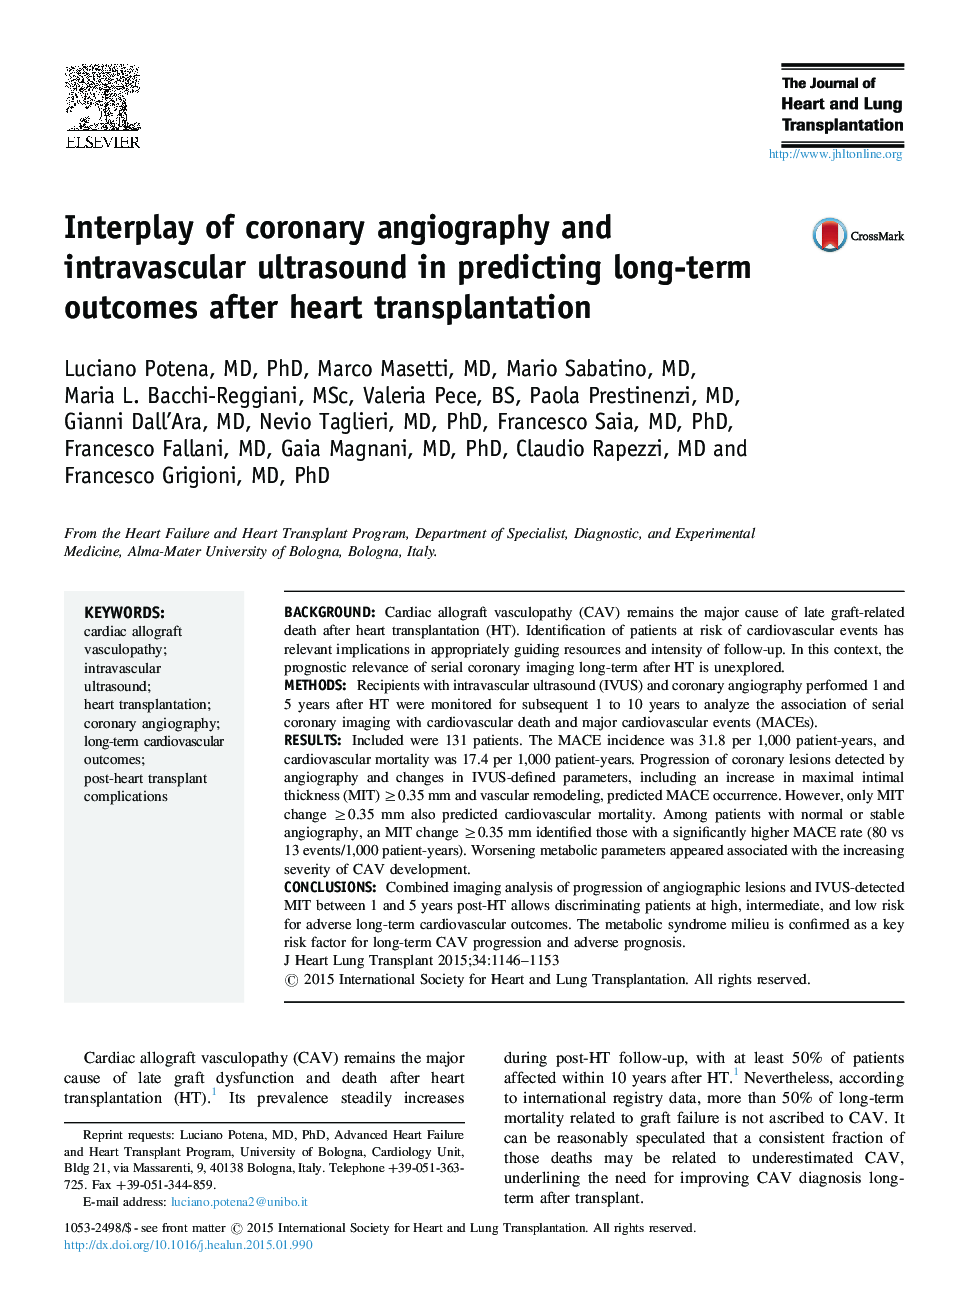 Interplay of coronary angiography and intravascular ultrasound in predicting long-term outcomes after heart transplantation